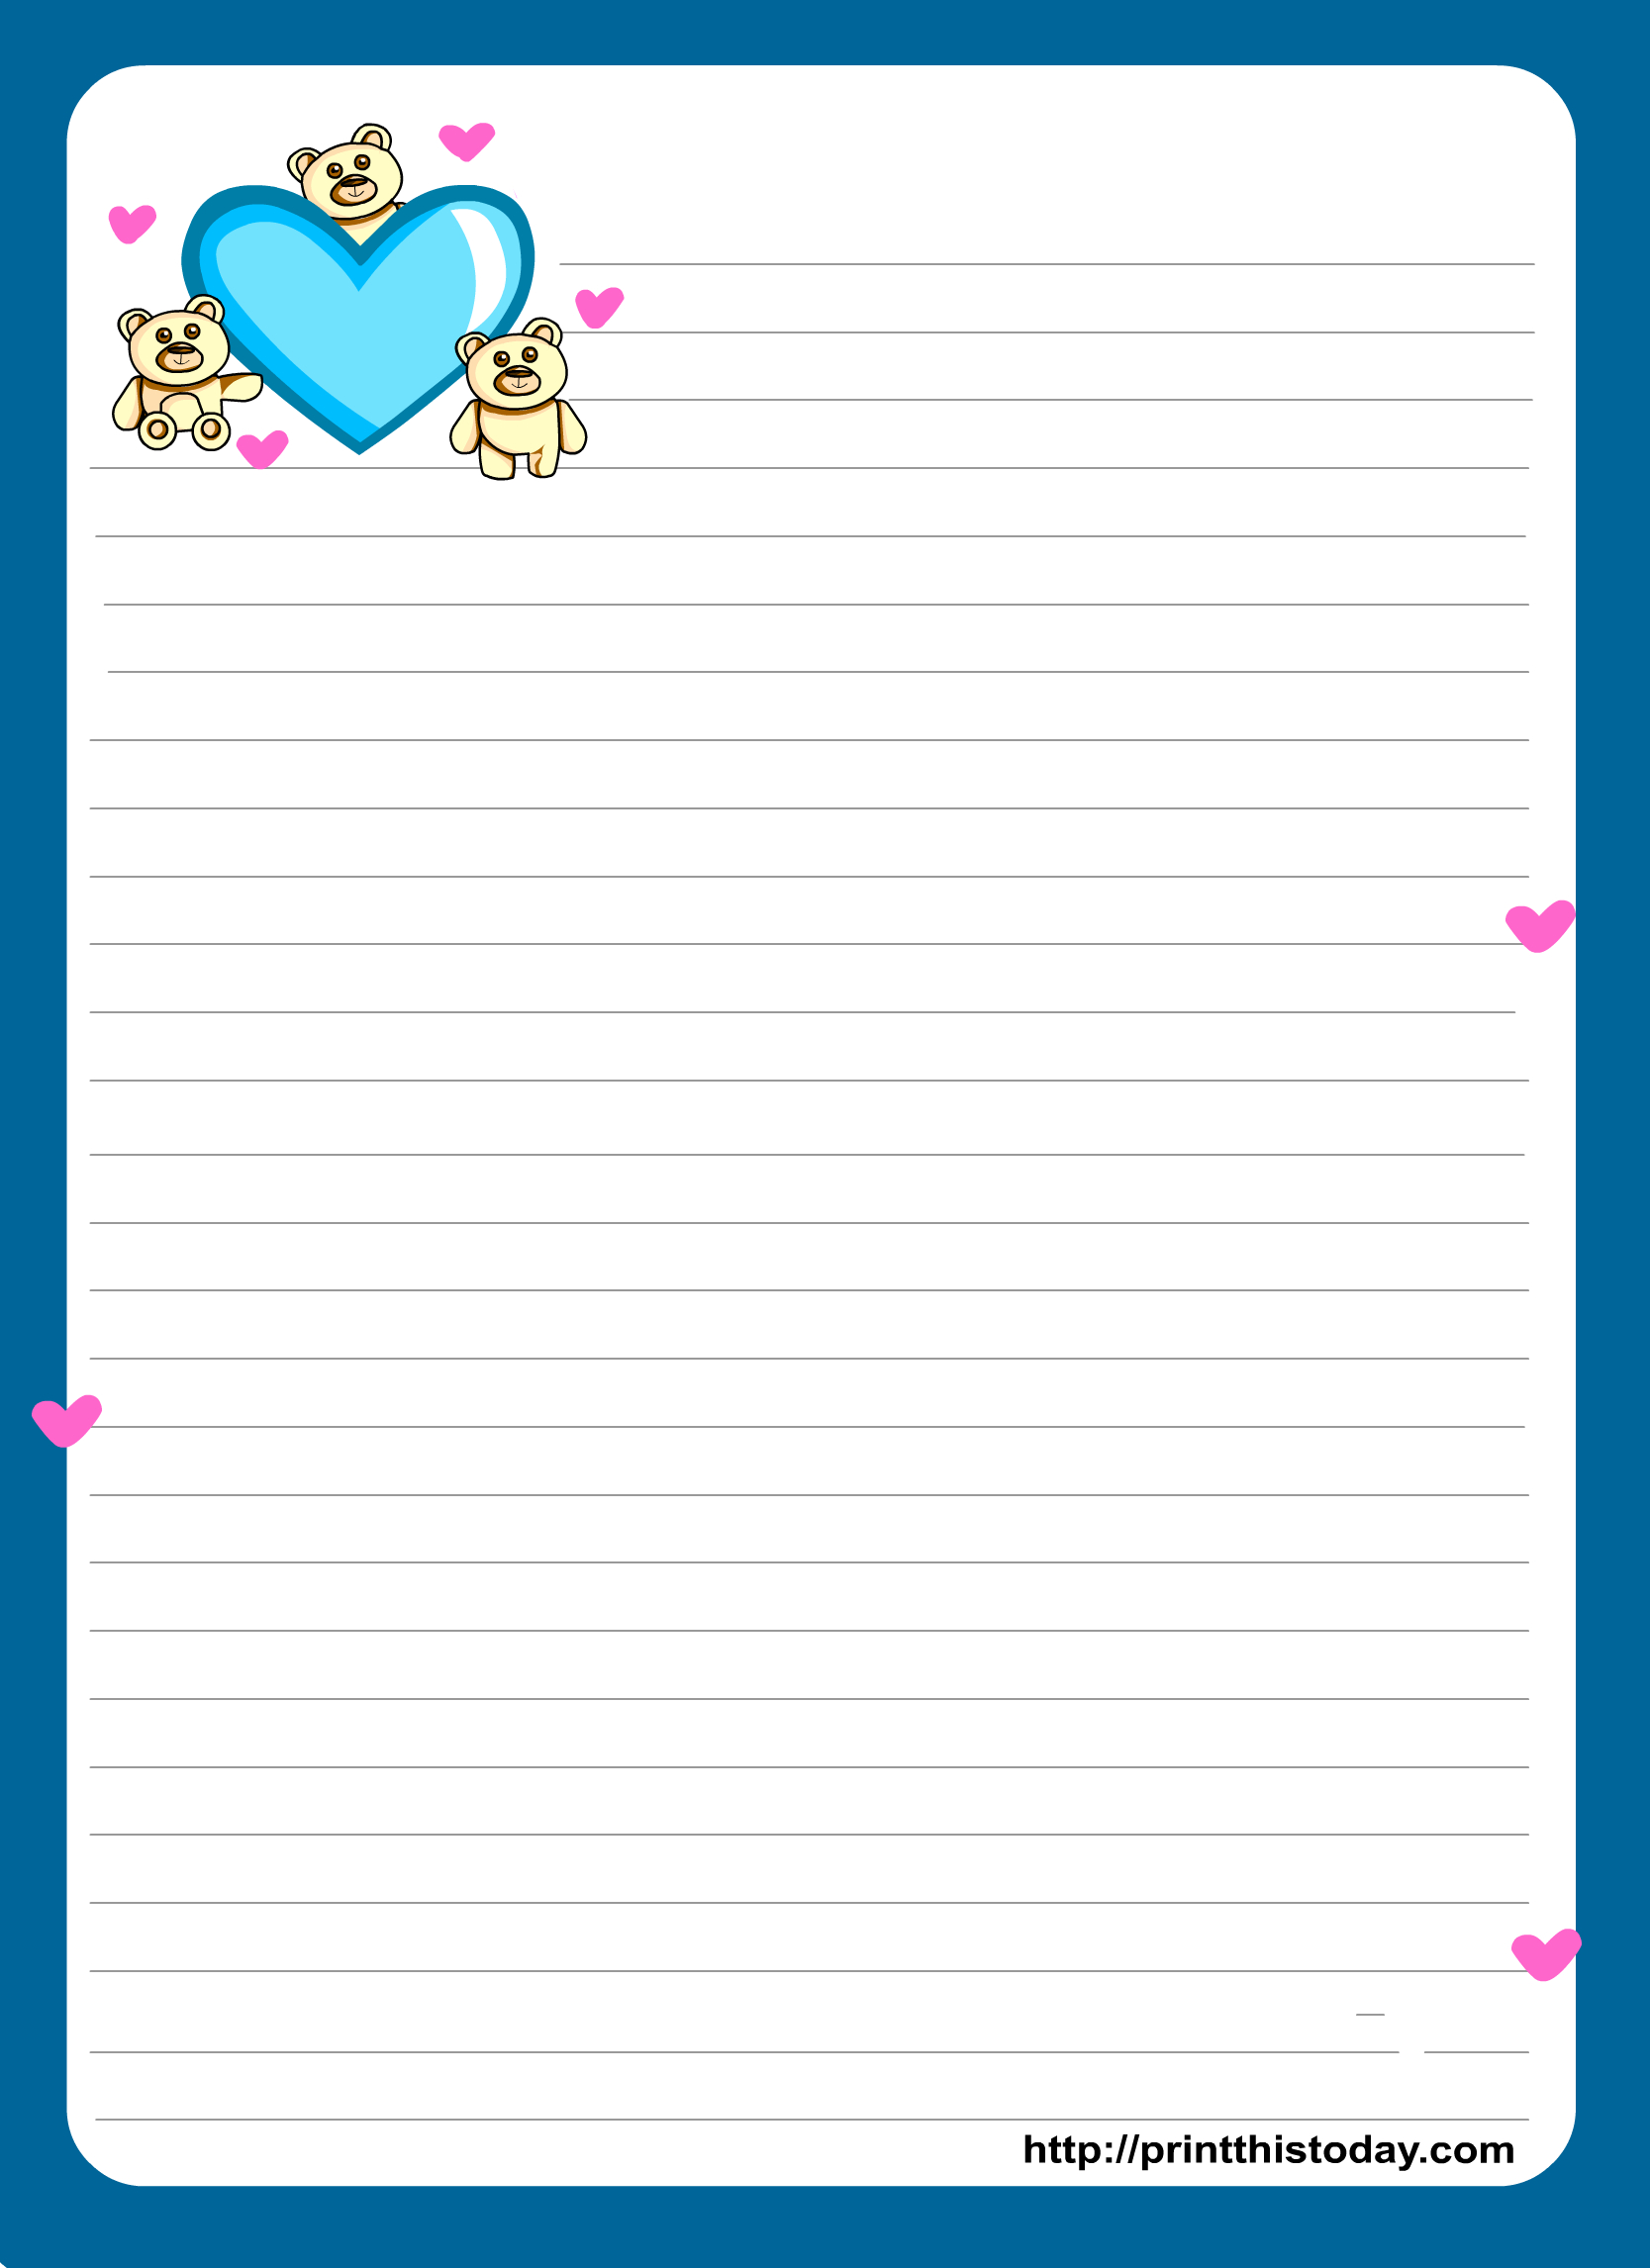 Miss You Love Letter Pad Stationery | Lined Stationery | Free - Free Printable Stationary